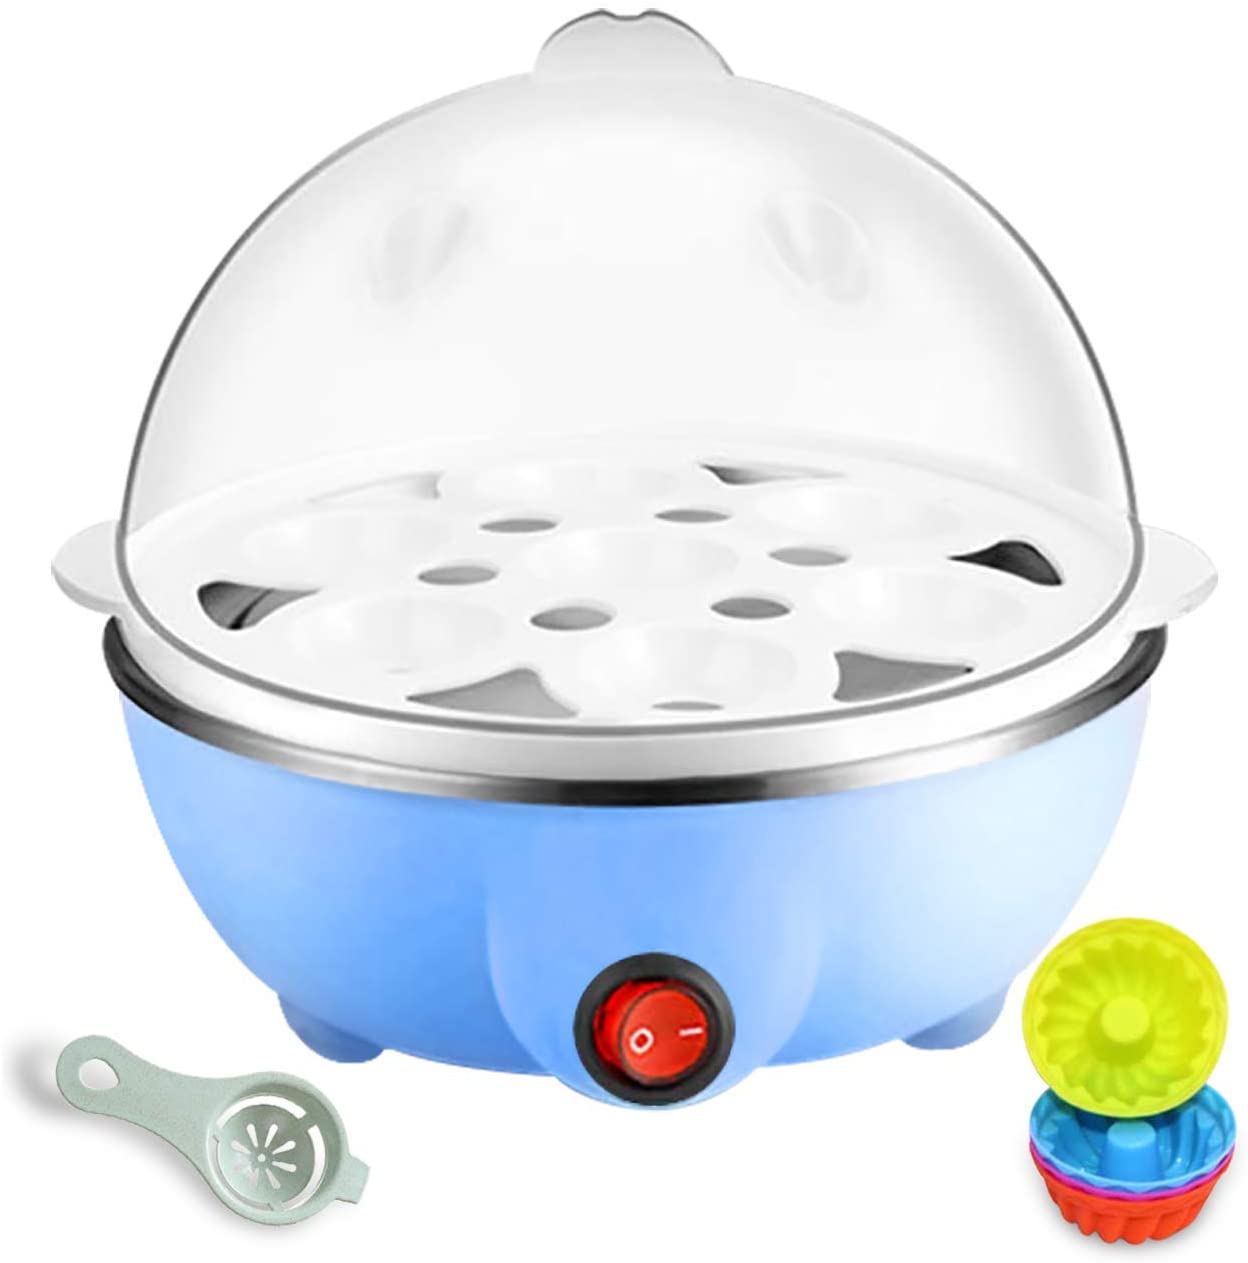 readleaf Electric Egg Boiler Easy Electric Egg Poacher with Automatic Shut-Off, Capacity 1-7 Eggs, BPA-Free (Blue)